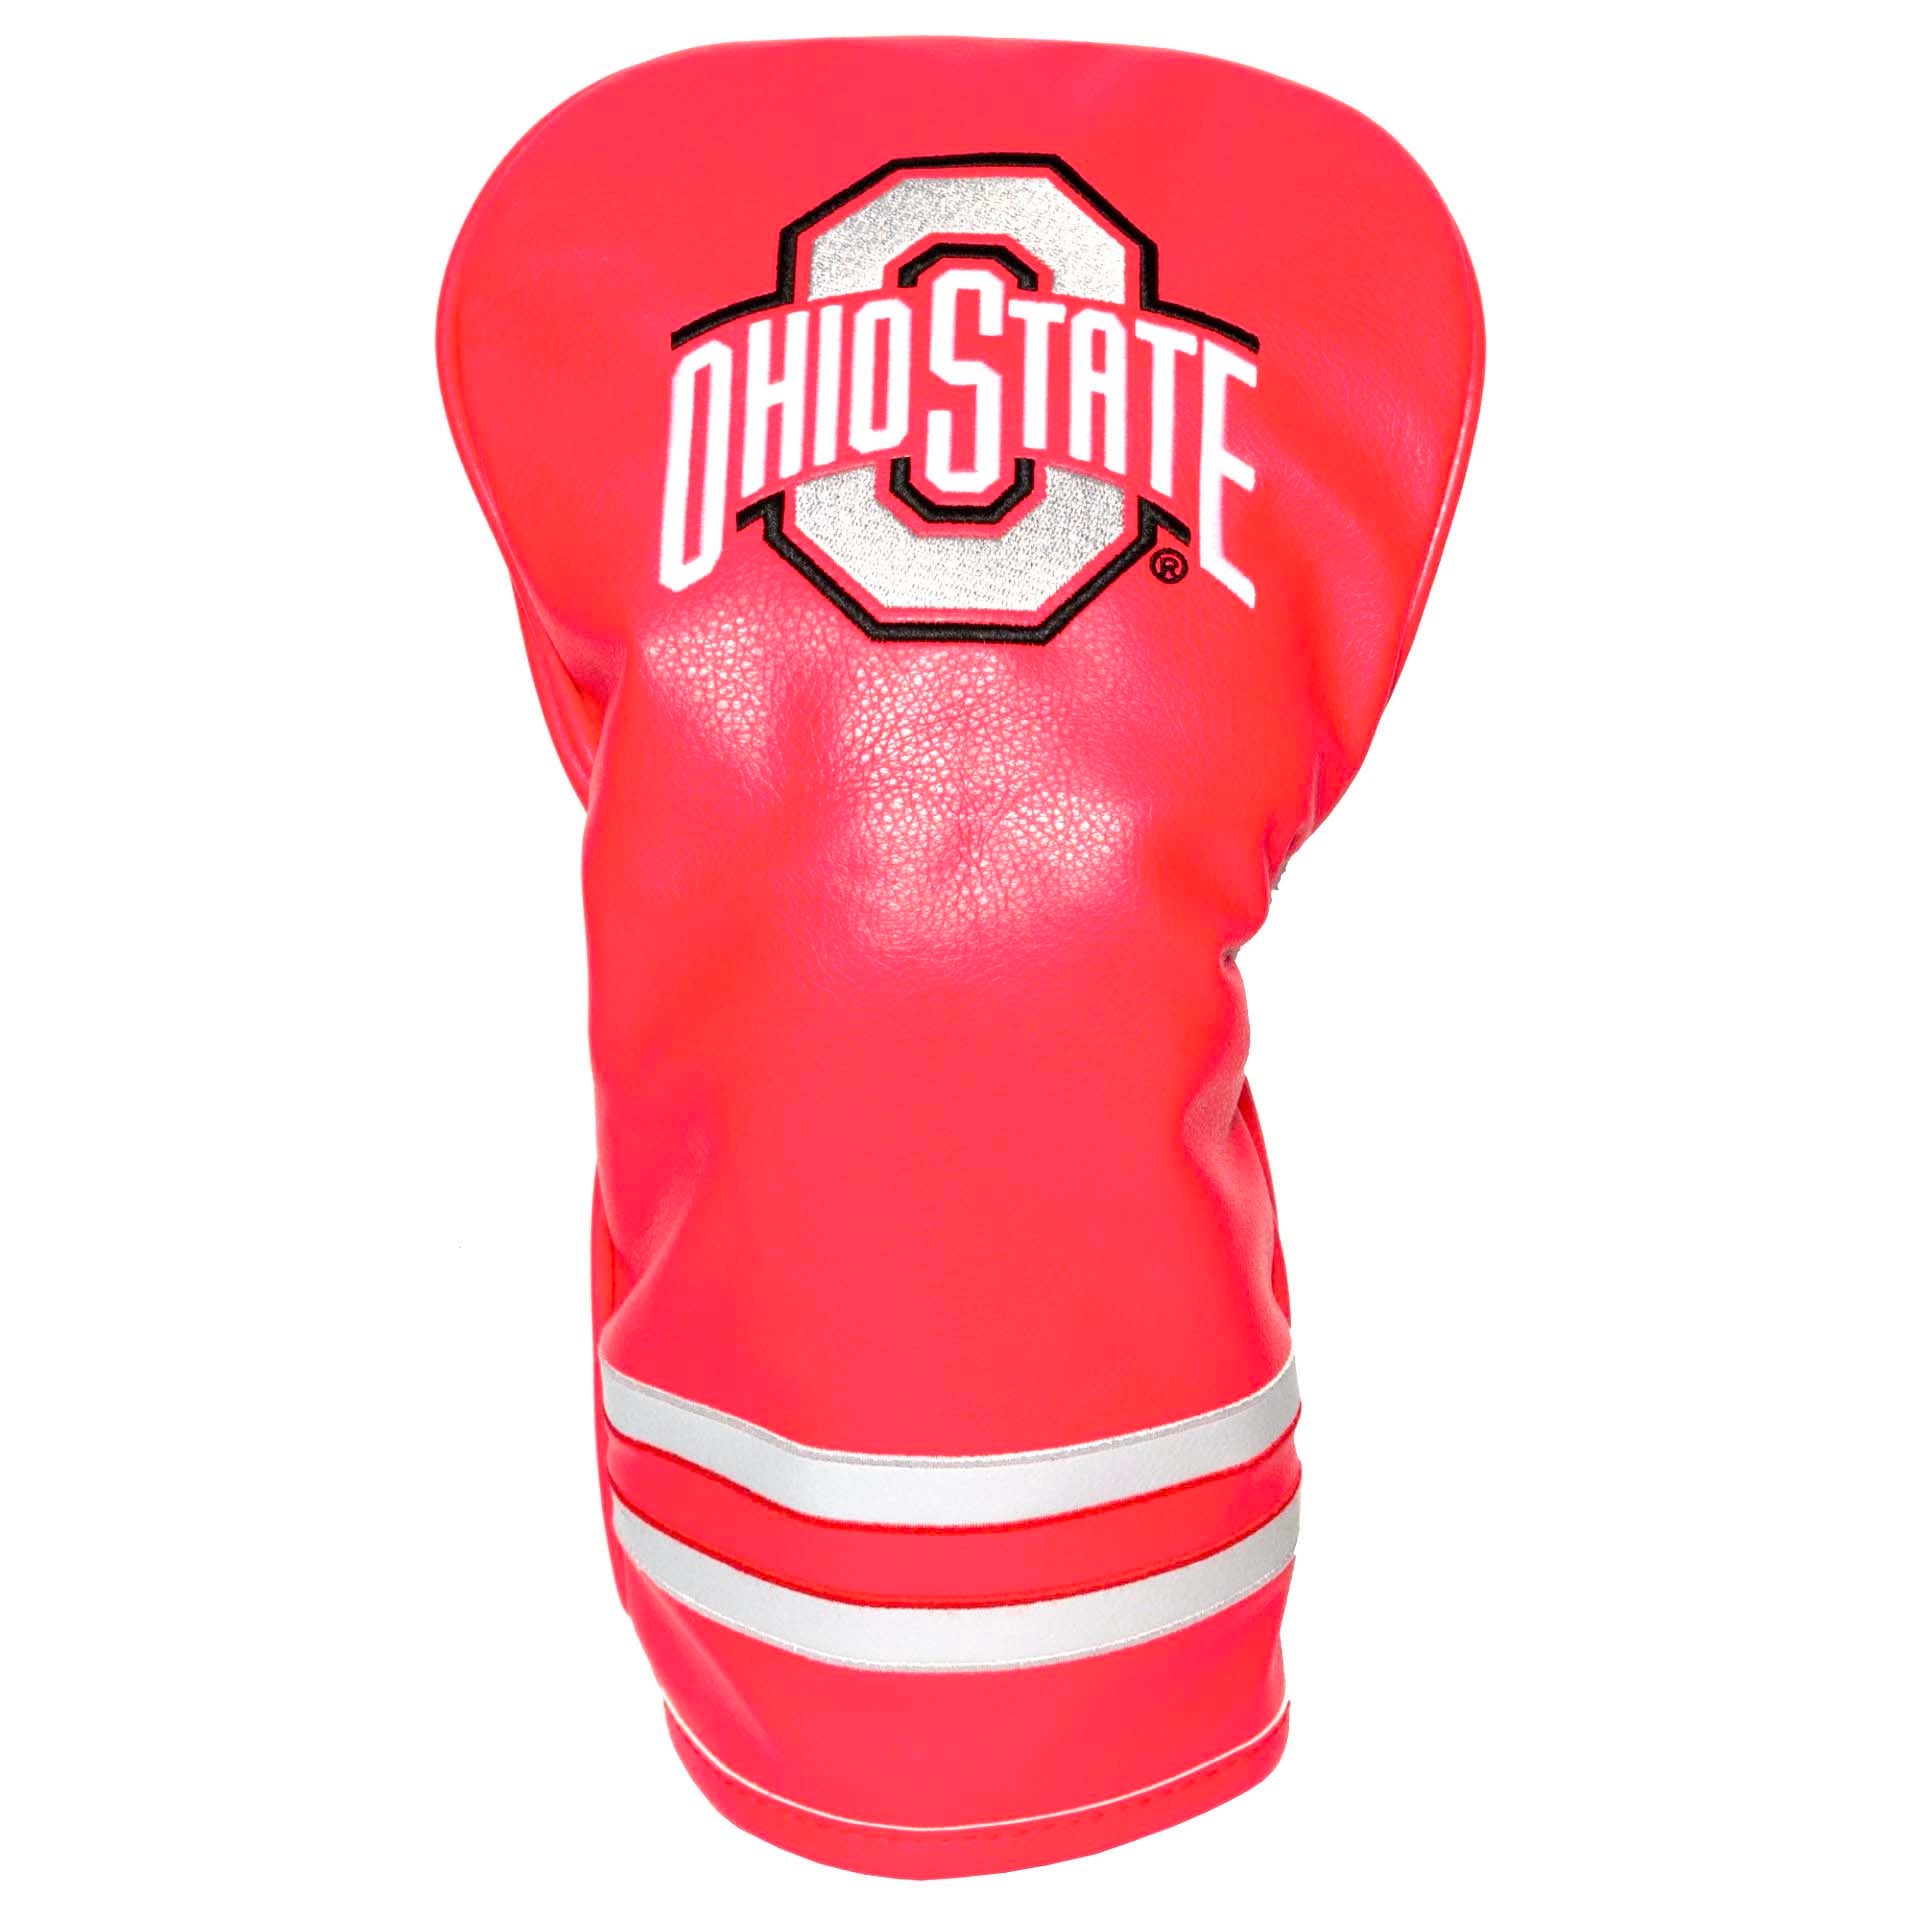 OHIO STATE VINTAGE DRIVER HEADCOVER